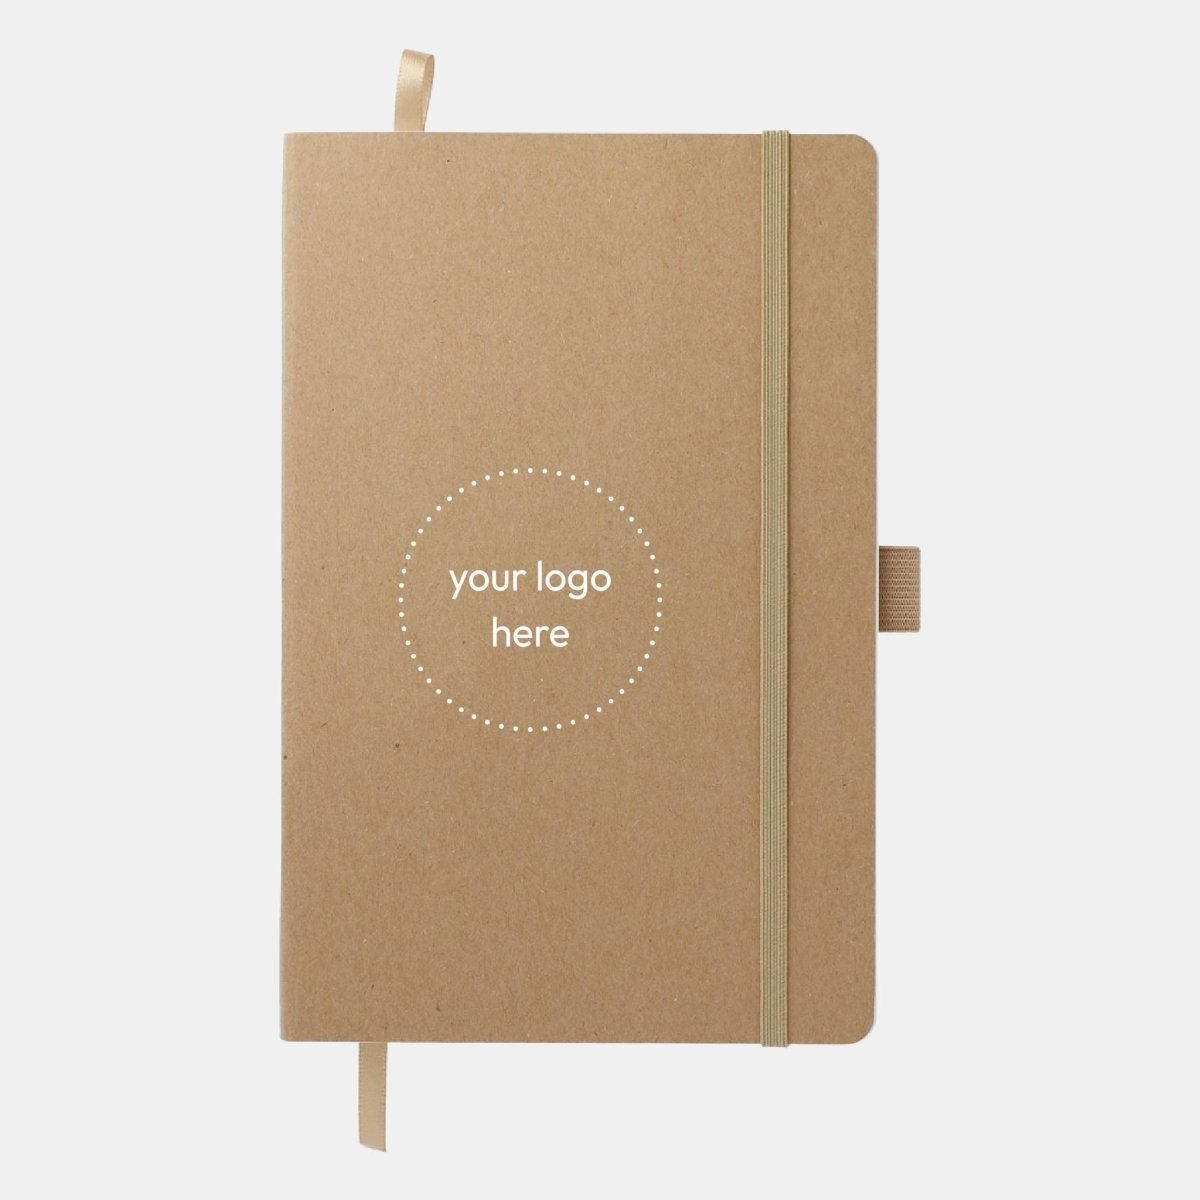 Essential Stone Paper Softcover Notebook